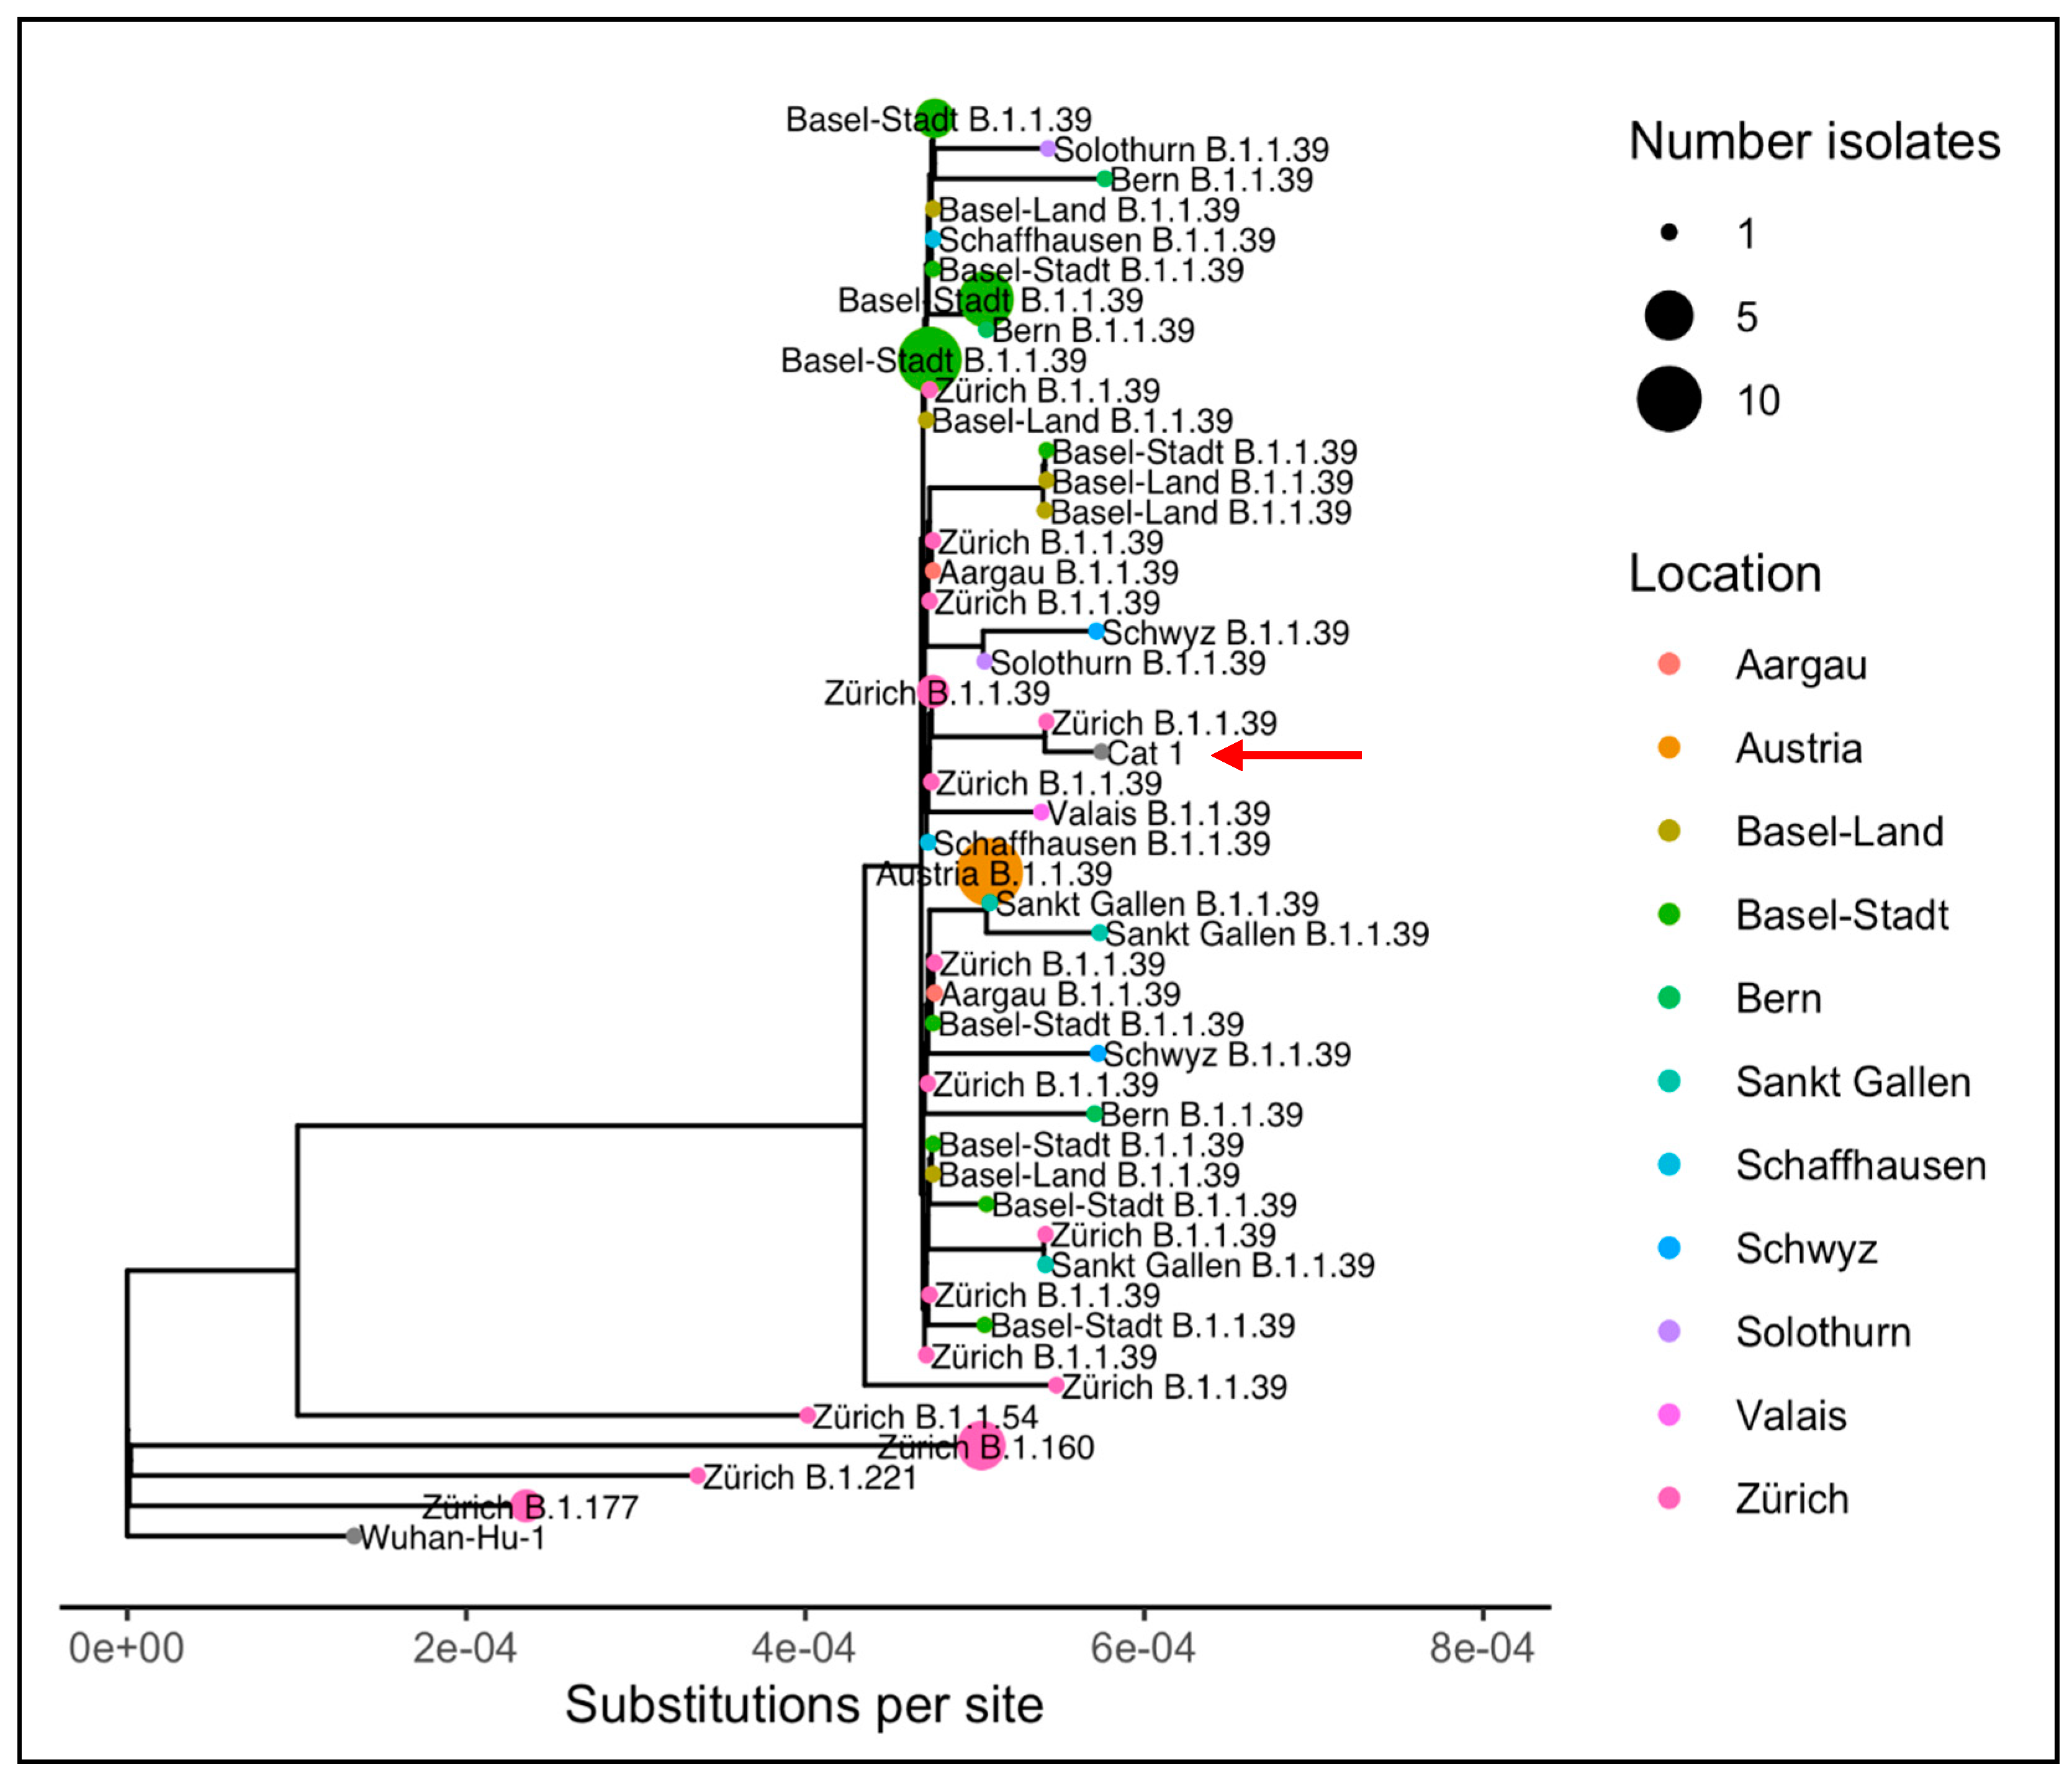 Viruses | Free Full-Text | Detection and Genome Sequencing of SARS-CoV-2 in  a Domestic Cat with Respiratory Signs in Switzerland | HTML